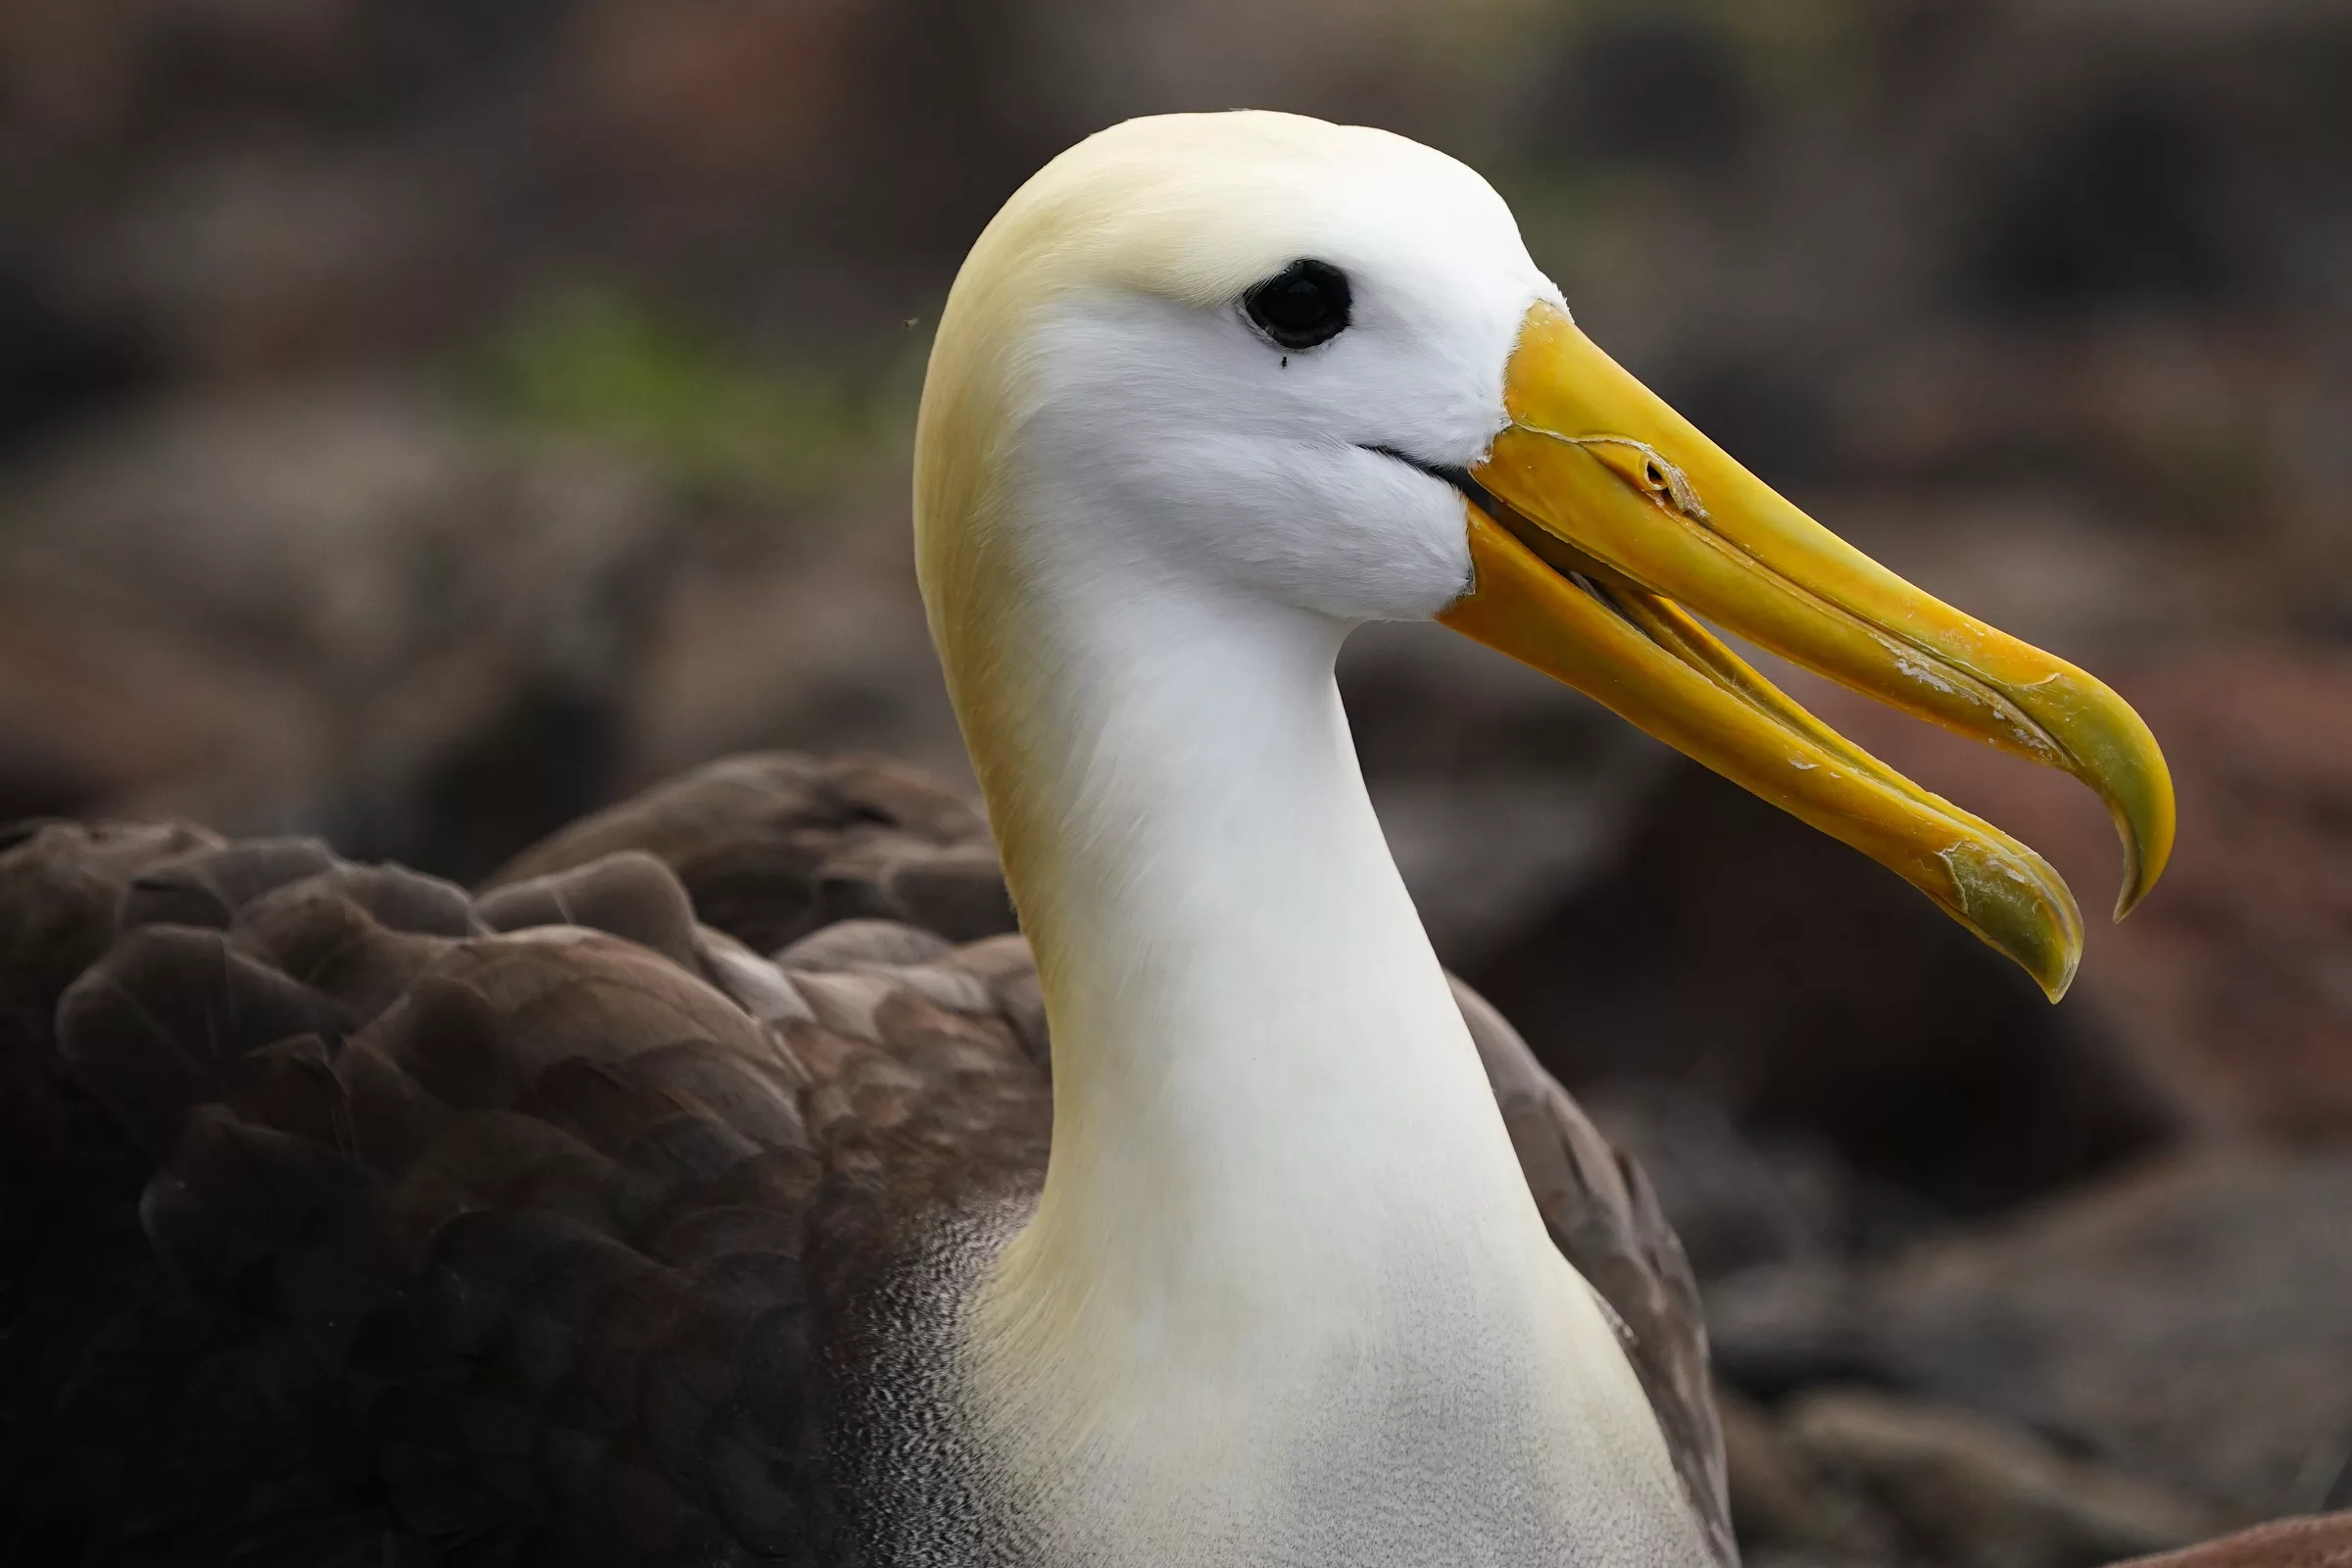 Galapagos Islands Yacht-Based Tour & Guided Photography Experience - Waved Albatross